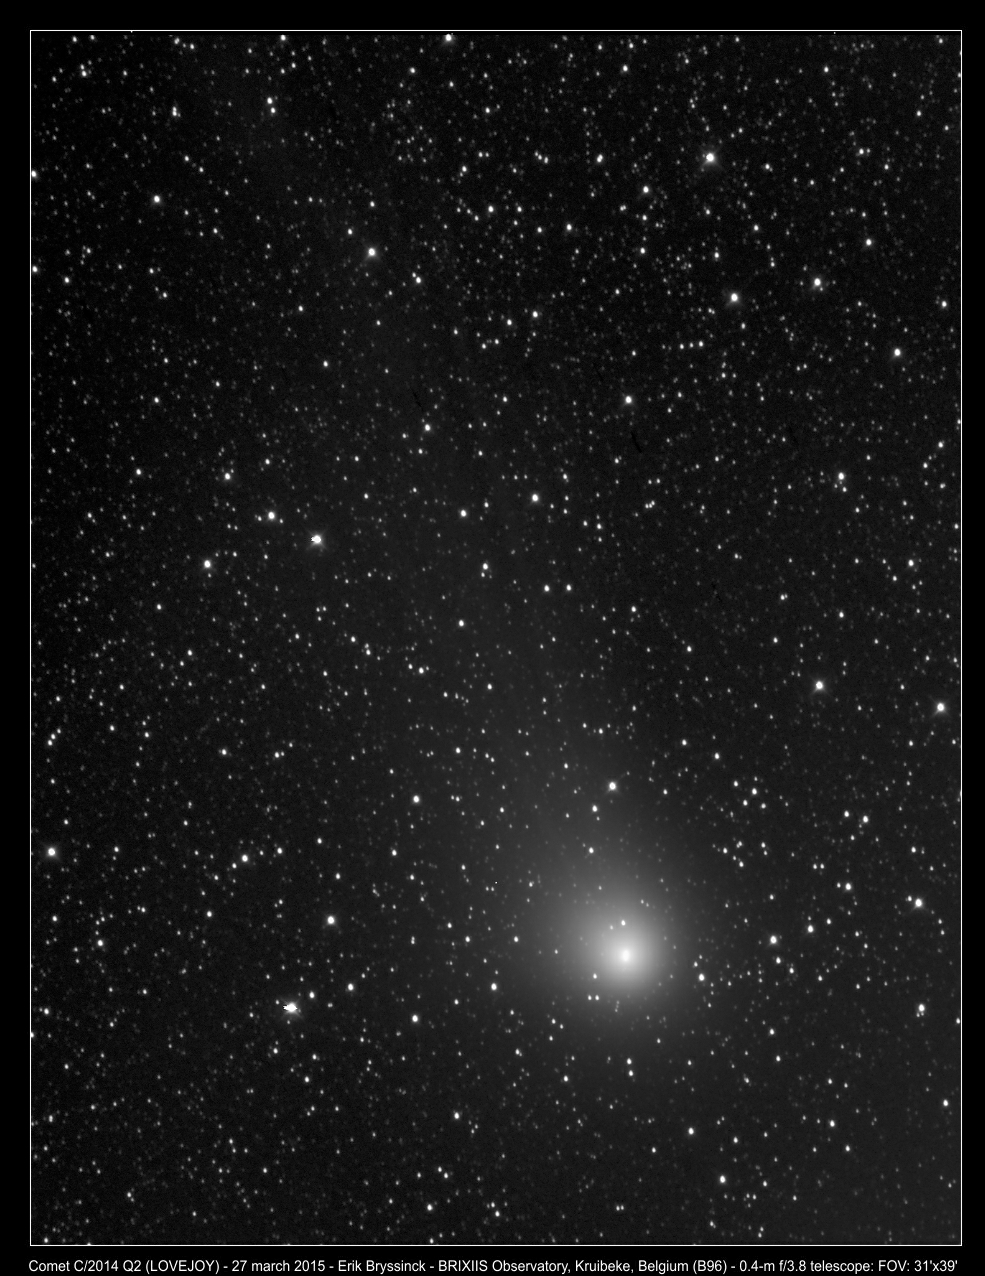 image comet C/2014 Q2 (LOVEJOY) on 27 march 2015 by Erik Bryssinck from BRIXIIS Observatory (B96 observatory)